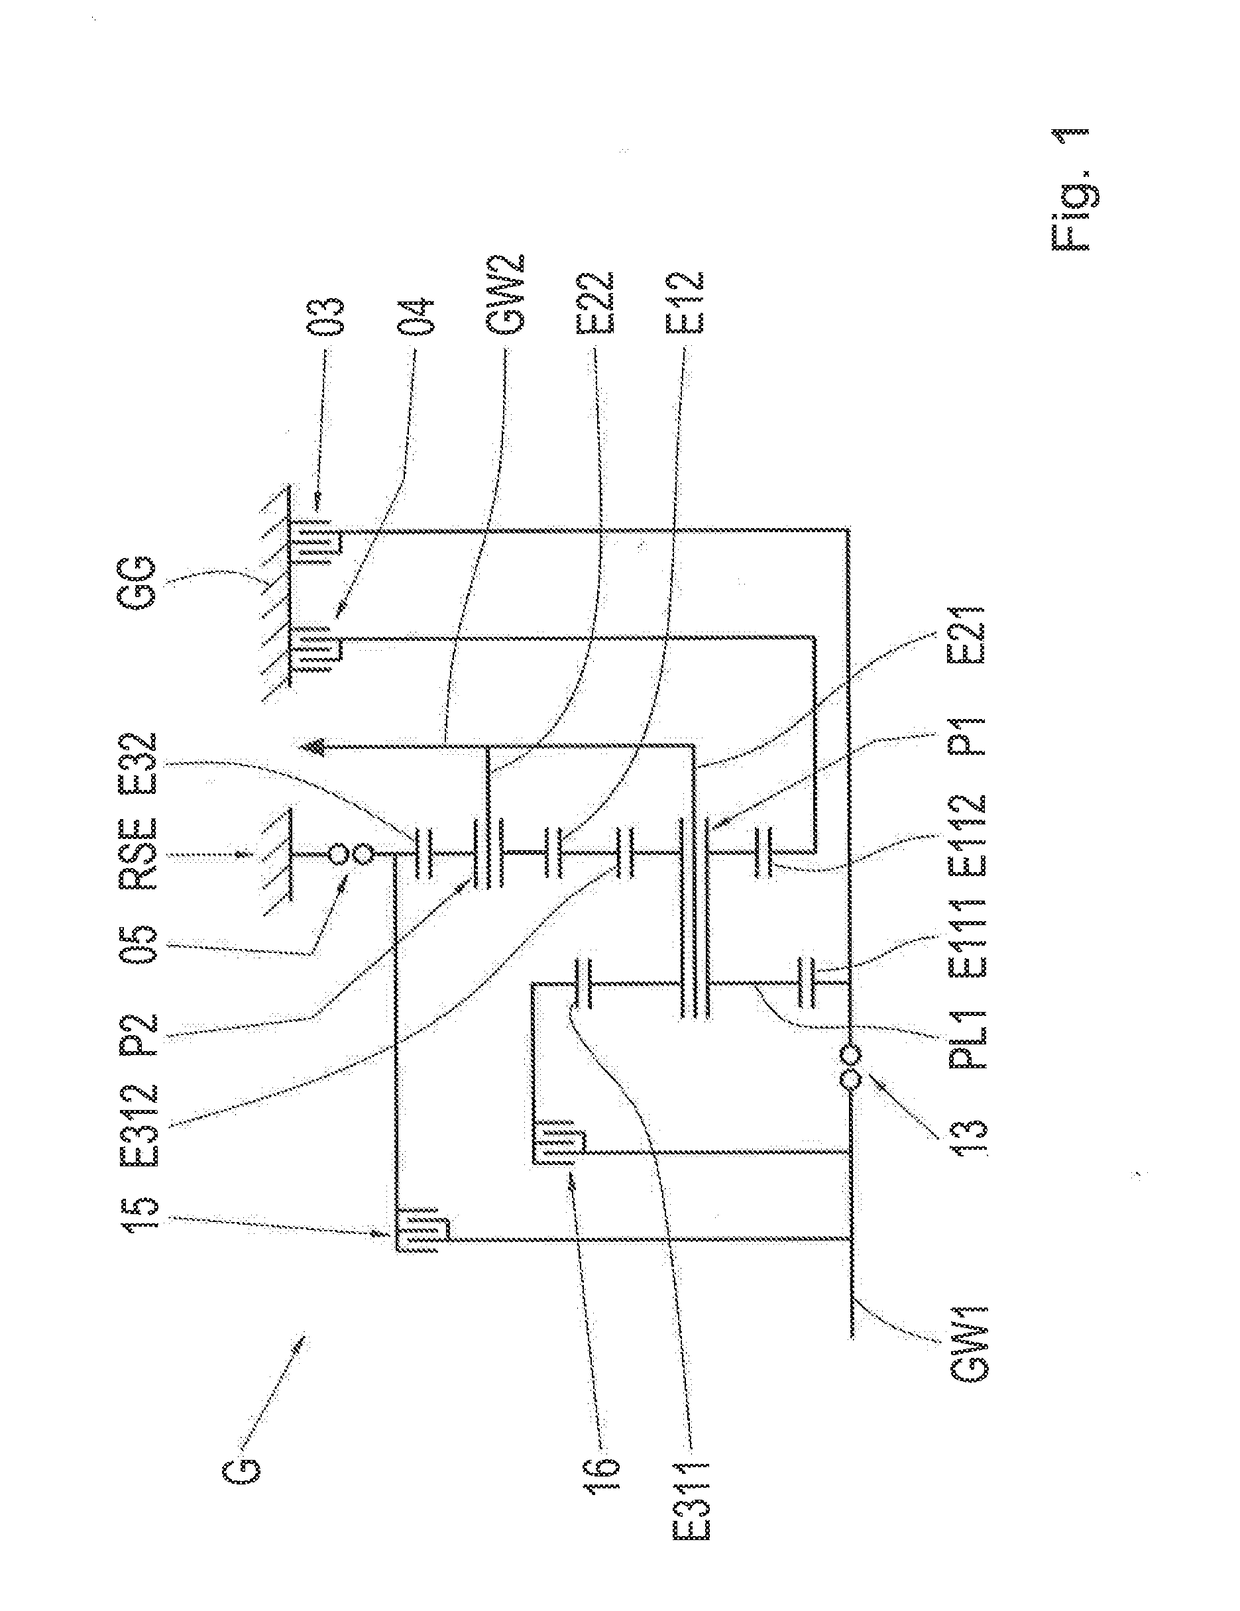 Transmission for a Vehicle